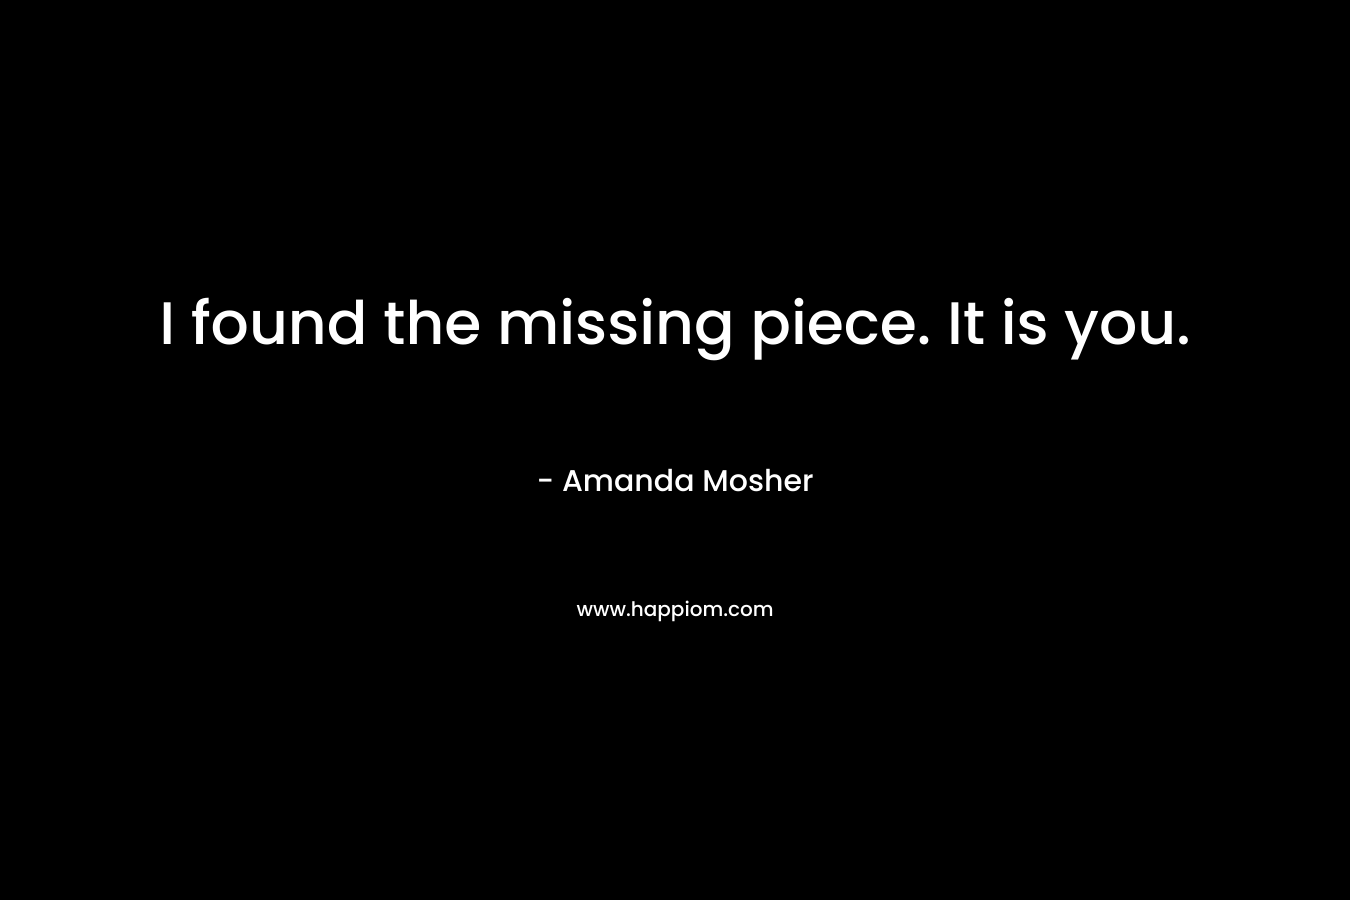 I found the missing piece. It is you.